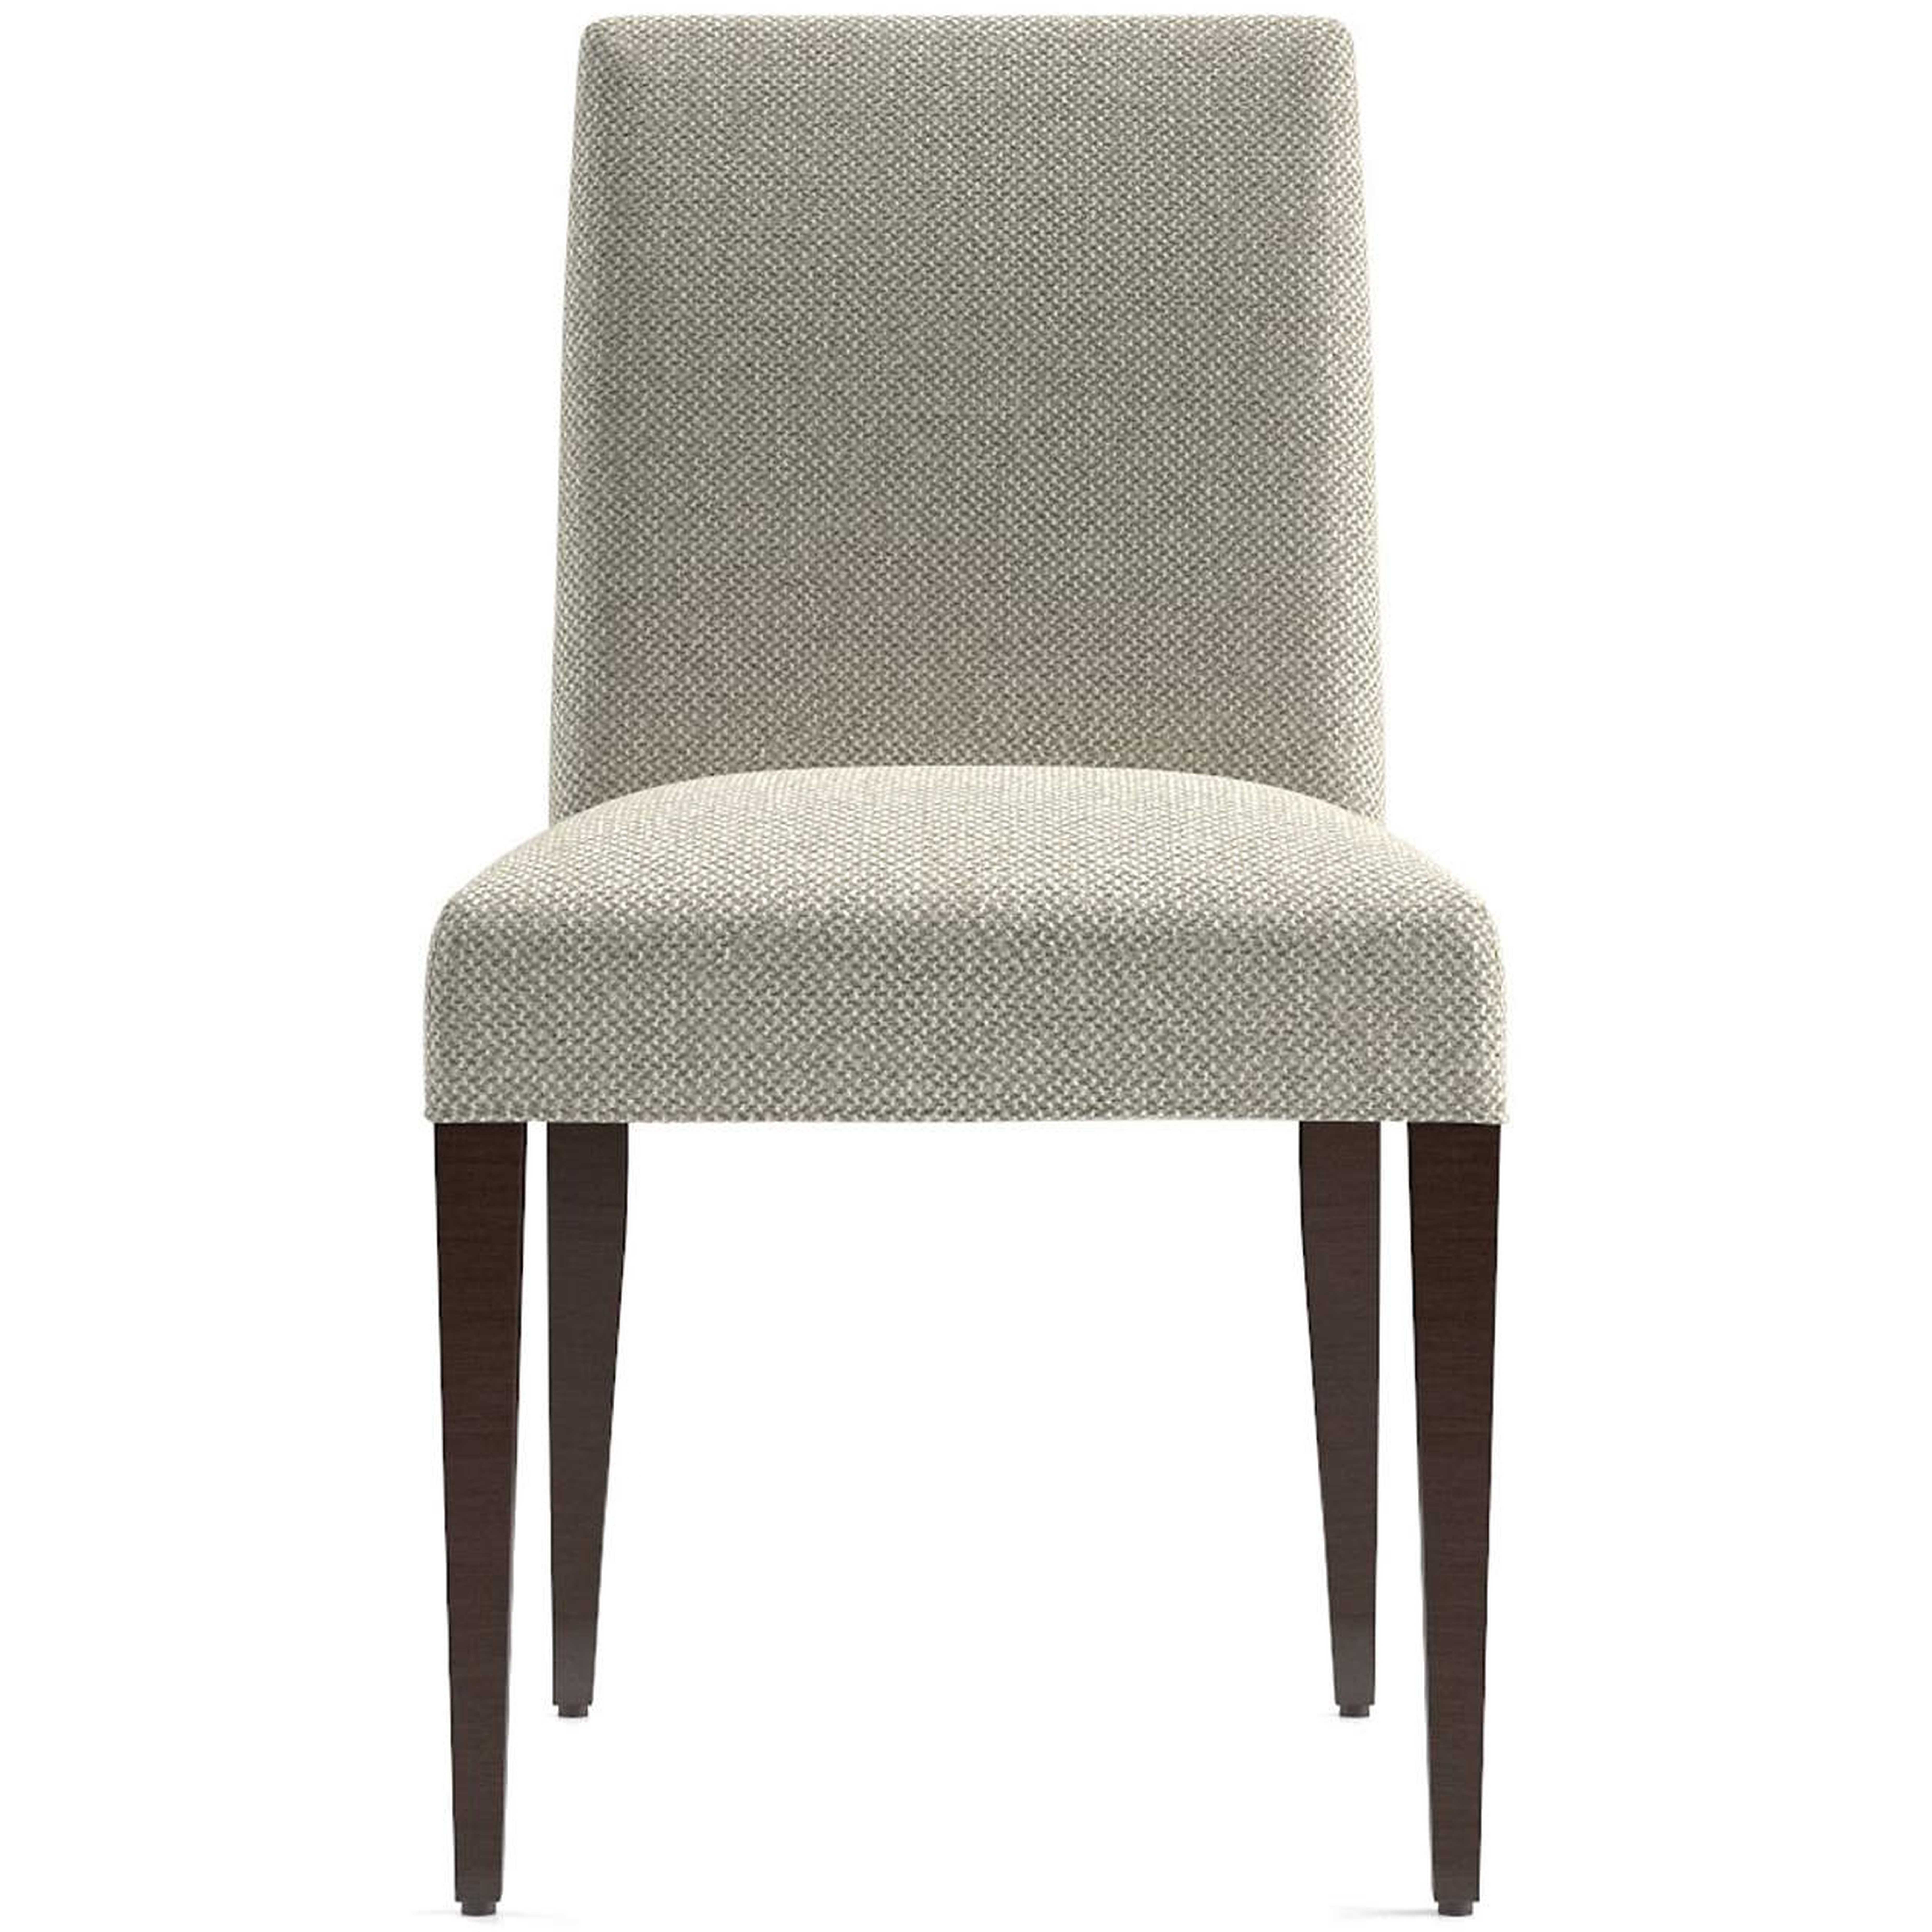 Miles Upholstered Dining Chair / Tobias, Sand - Crate and Barrel